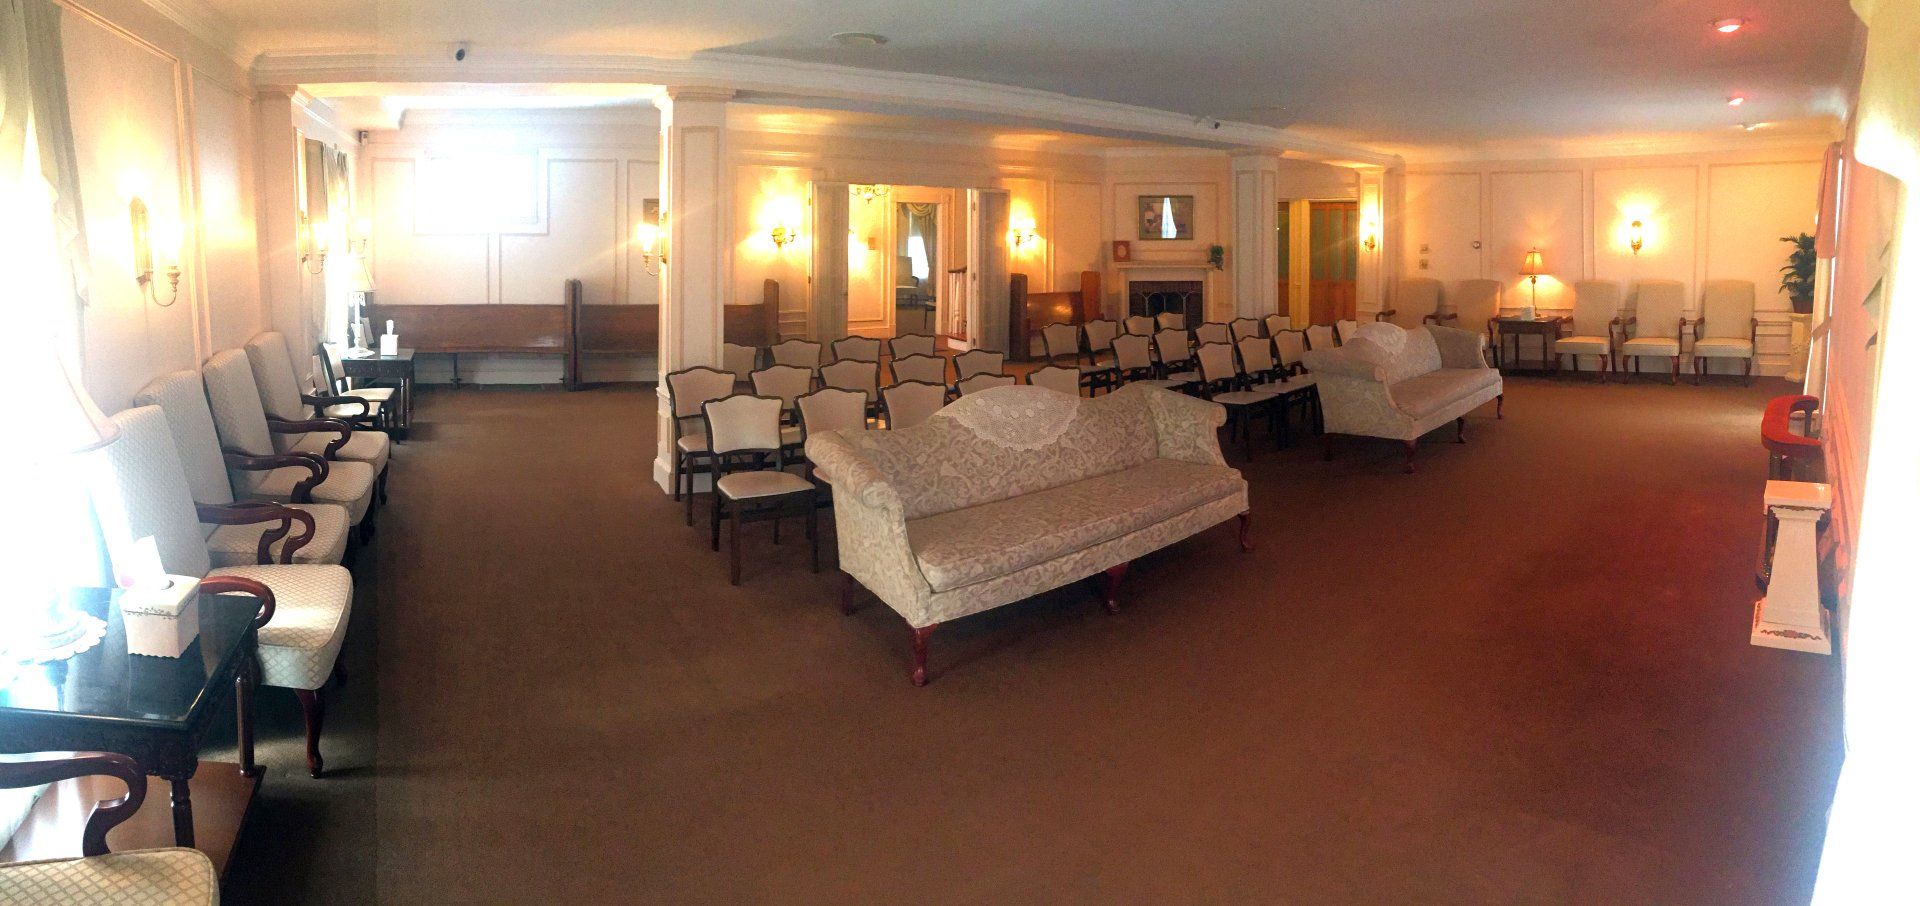 Brendese Funeral Home Interior, Pre-Planning & Cremation Service in Albany NY